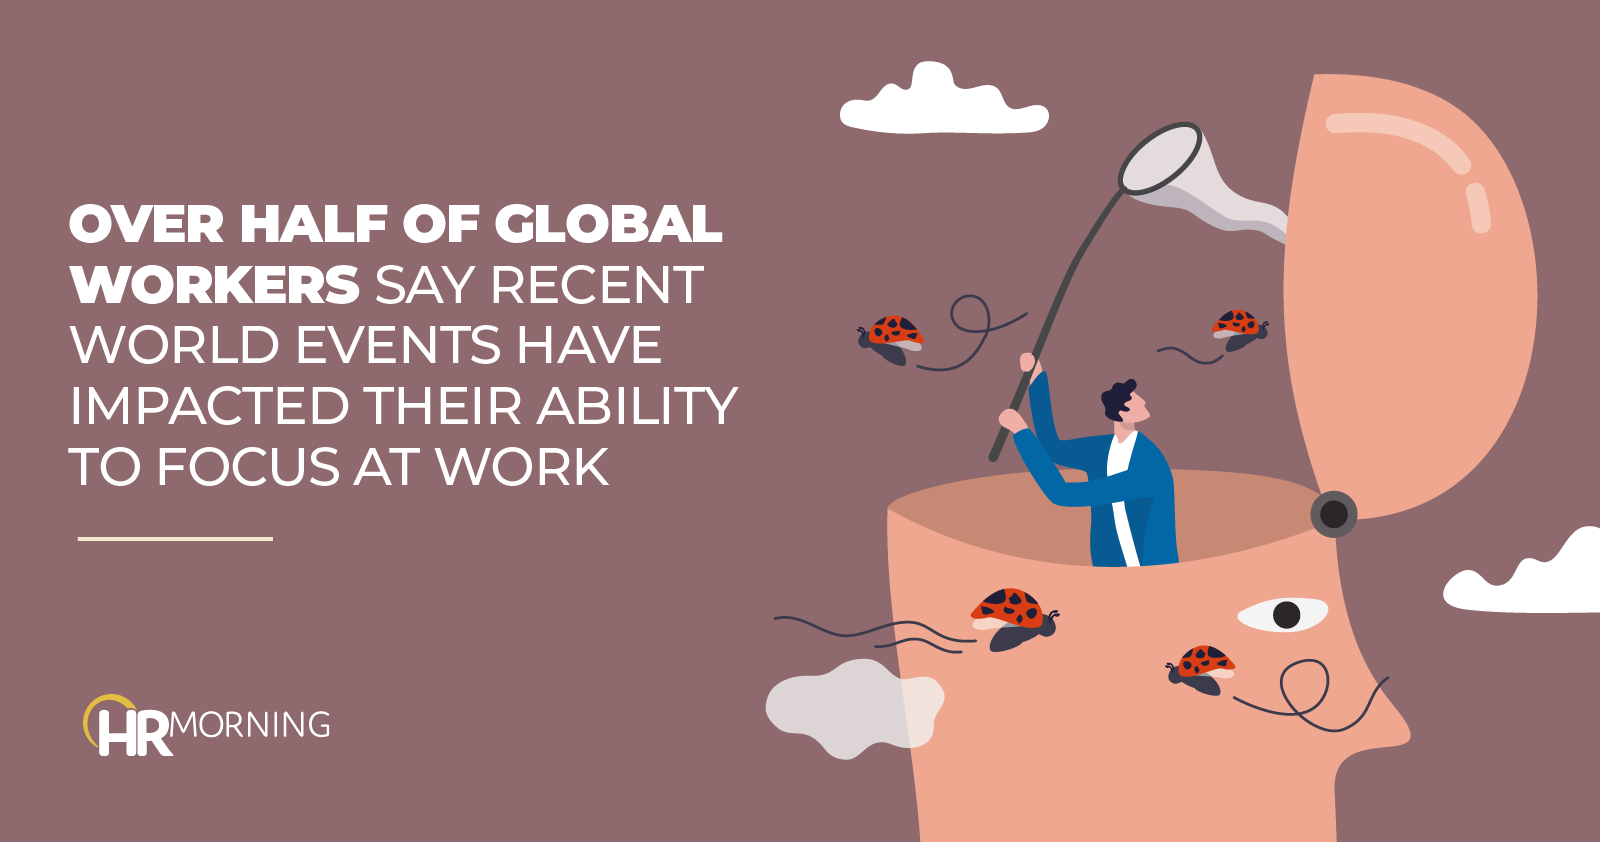 Over half of global workers say recent world events have impacted their ability to focus at work